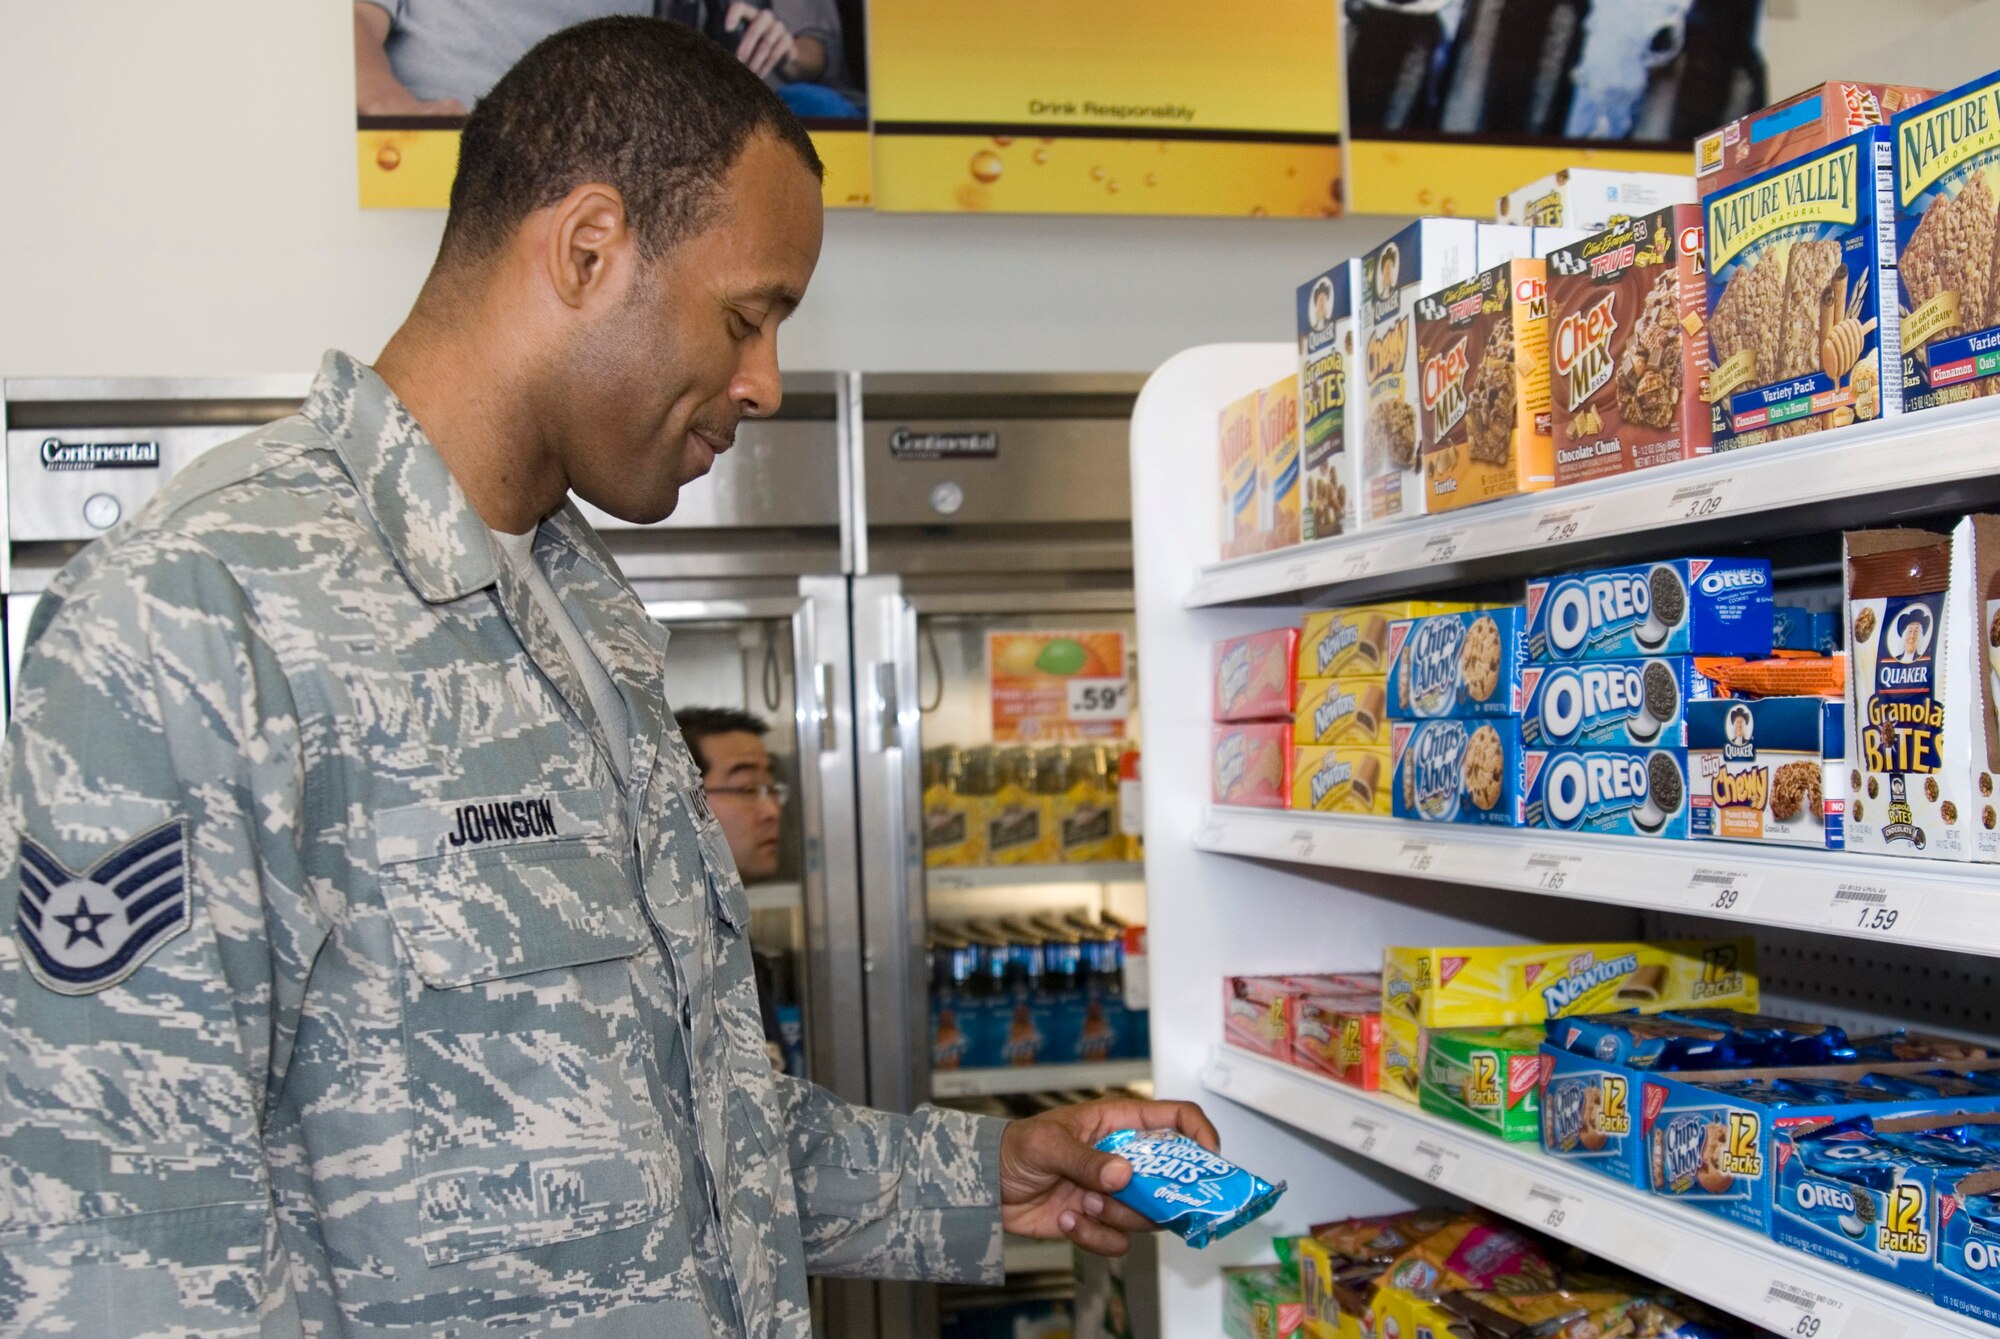 KUNSAN AIR BASE, Republic of Korea -- Staff Sgt. Adrian Johnson, 8th Comptroller Squadron financial technician, contemplates buying a snack during the grand opening of the new base shoppette. The shoppette construction began April 26 and was complete on May 26, costing approximately $41,000 to build. The hours of operation are 7:30 a.m. to 10 p.m. Monday through Thursday, 7:30 a.m. to 11 p.m. Friday and Saturday, and 10 a.m. to 10 p.m. Sunday. (U.S. Air Force photo/Staff Sgt. Jonathan Pomeroy)